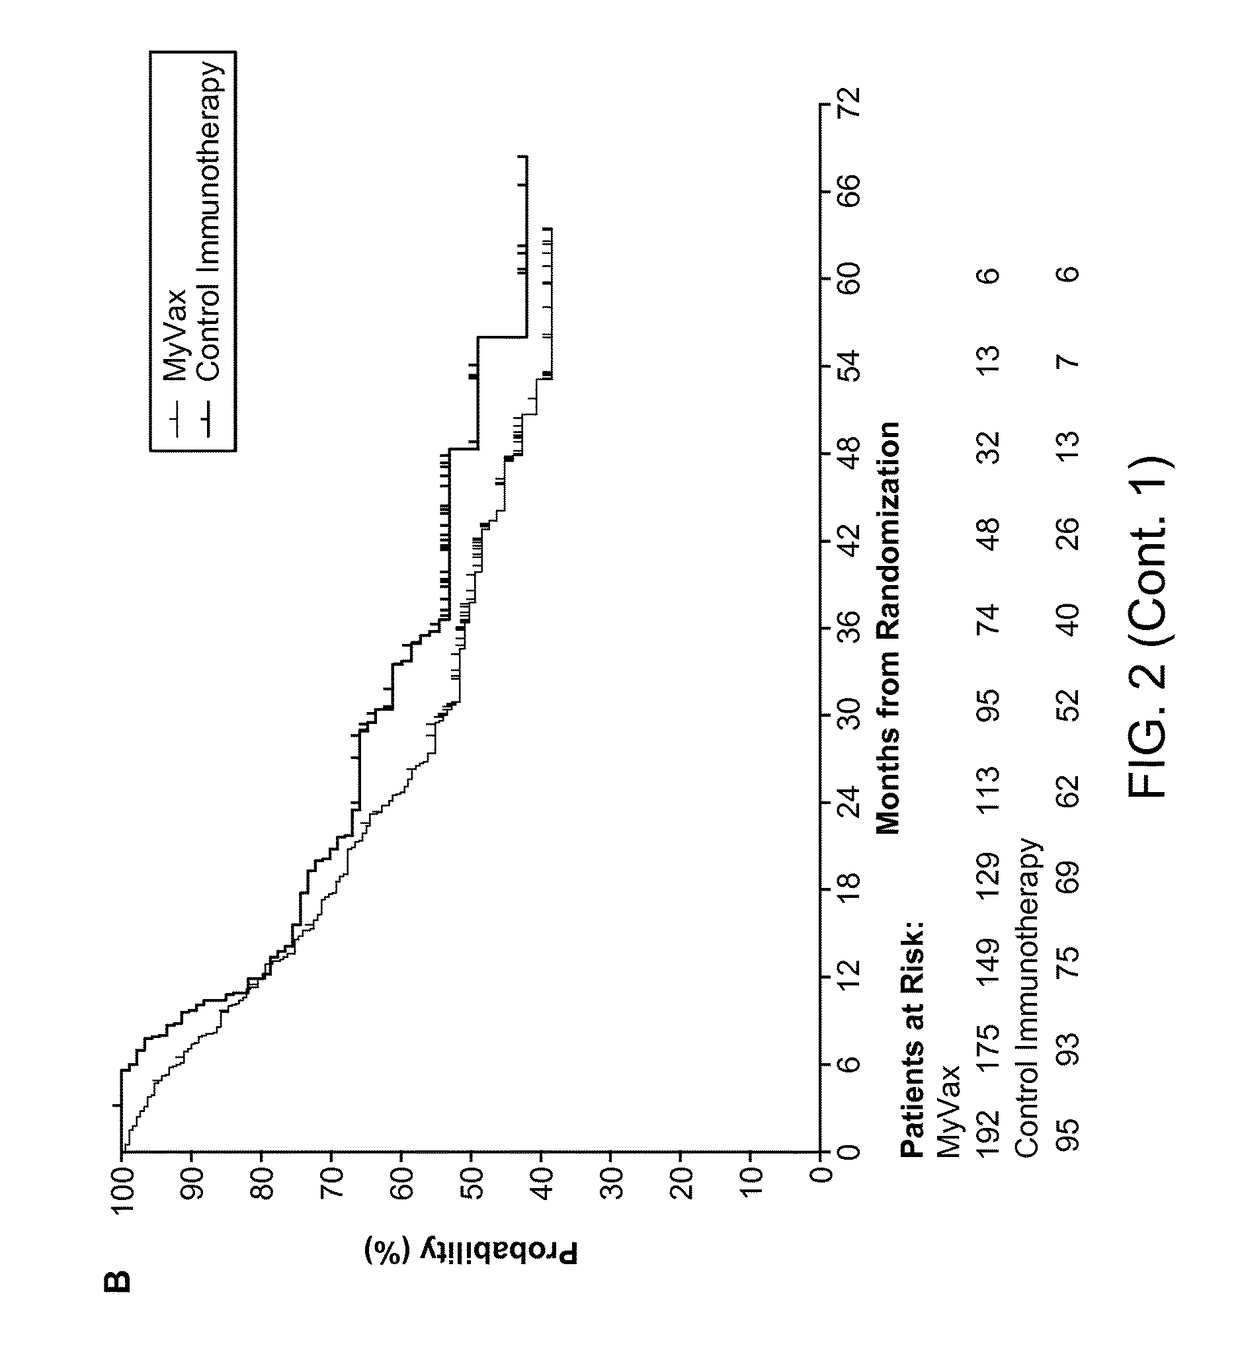 Method of predicting responsiveness of B cell lineage malignancies to active immunotherapy